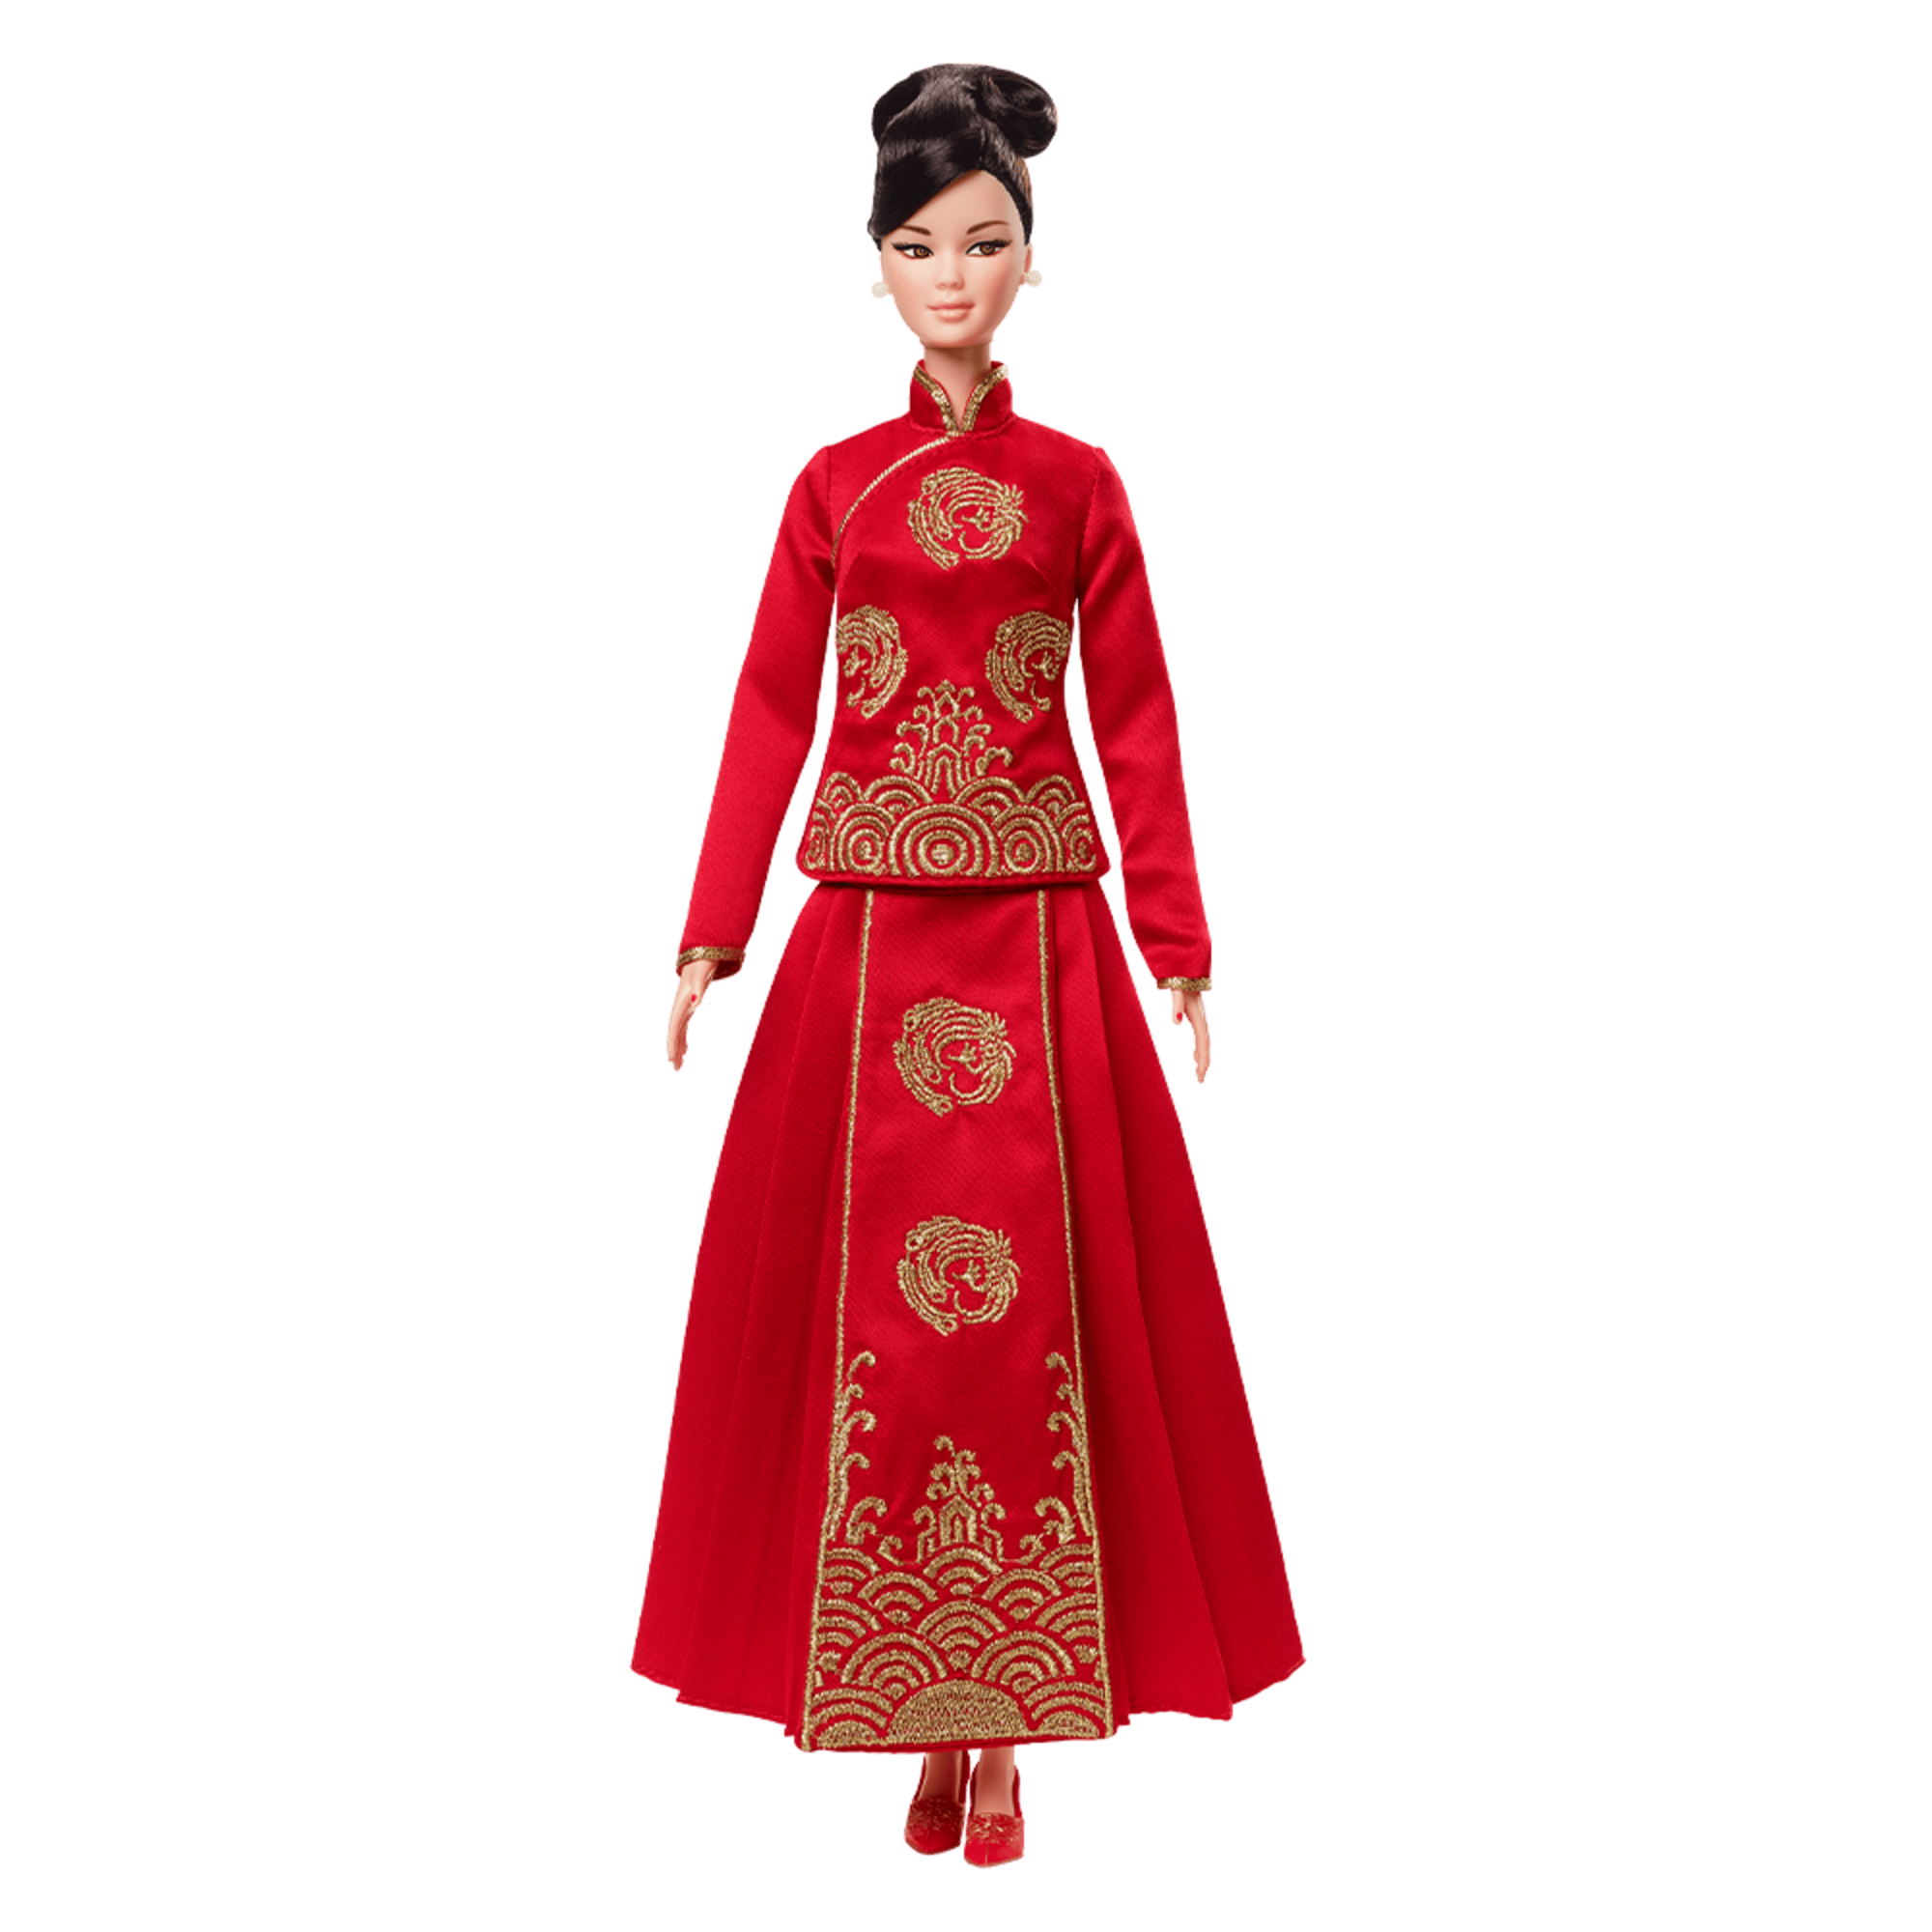 Barbie Lunar New Year Doll Designed by Guo Pei Mattel Creations